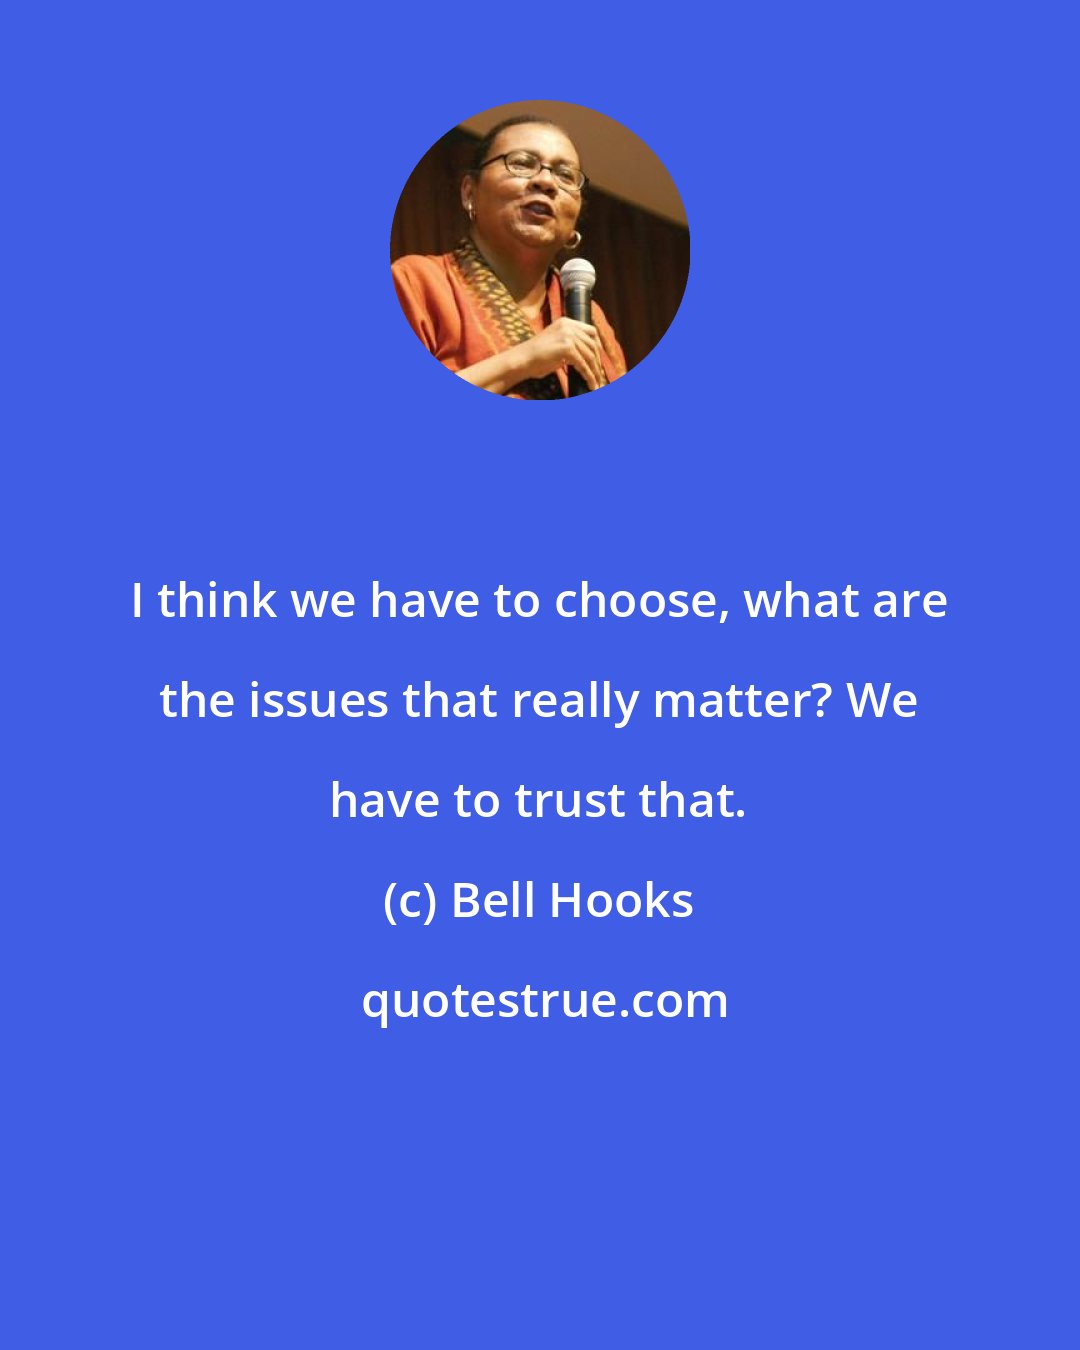 Bell Hooks: I think we have to choose, what are the issues that really matter? We have to trust that.